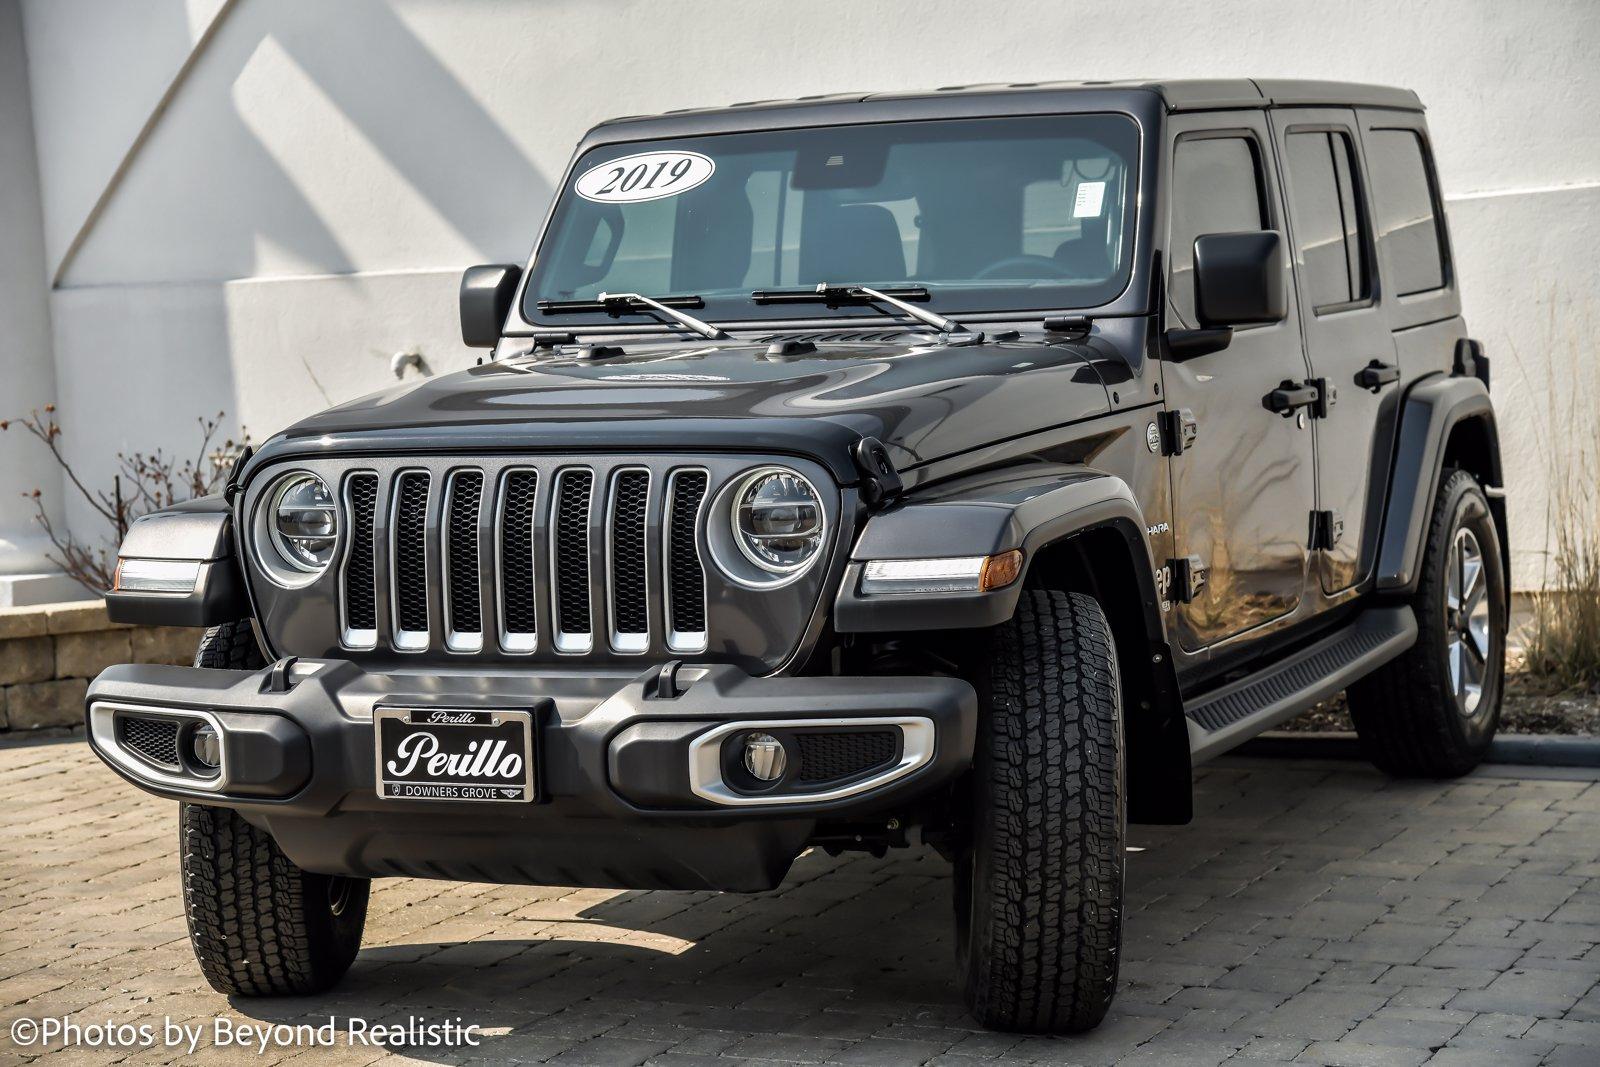 Used 2019 Jeep Wrangler Unlimited Sahara | Downers Grove, IL